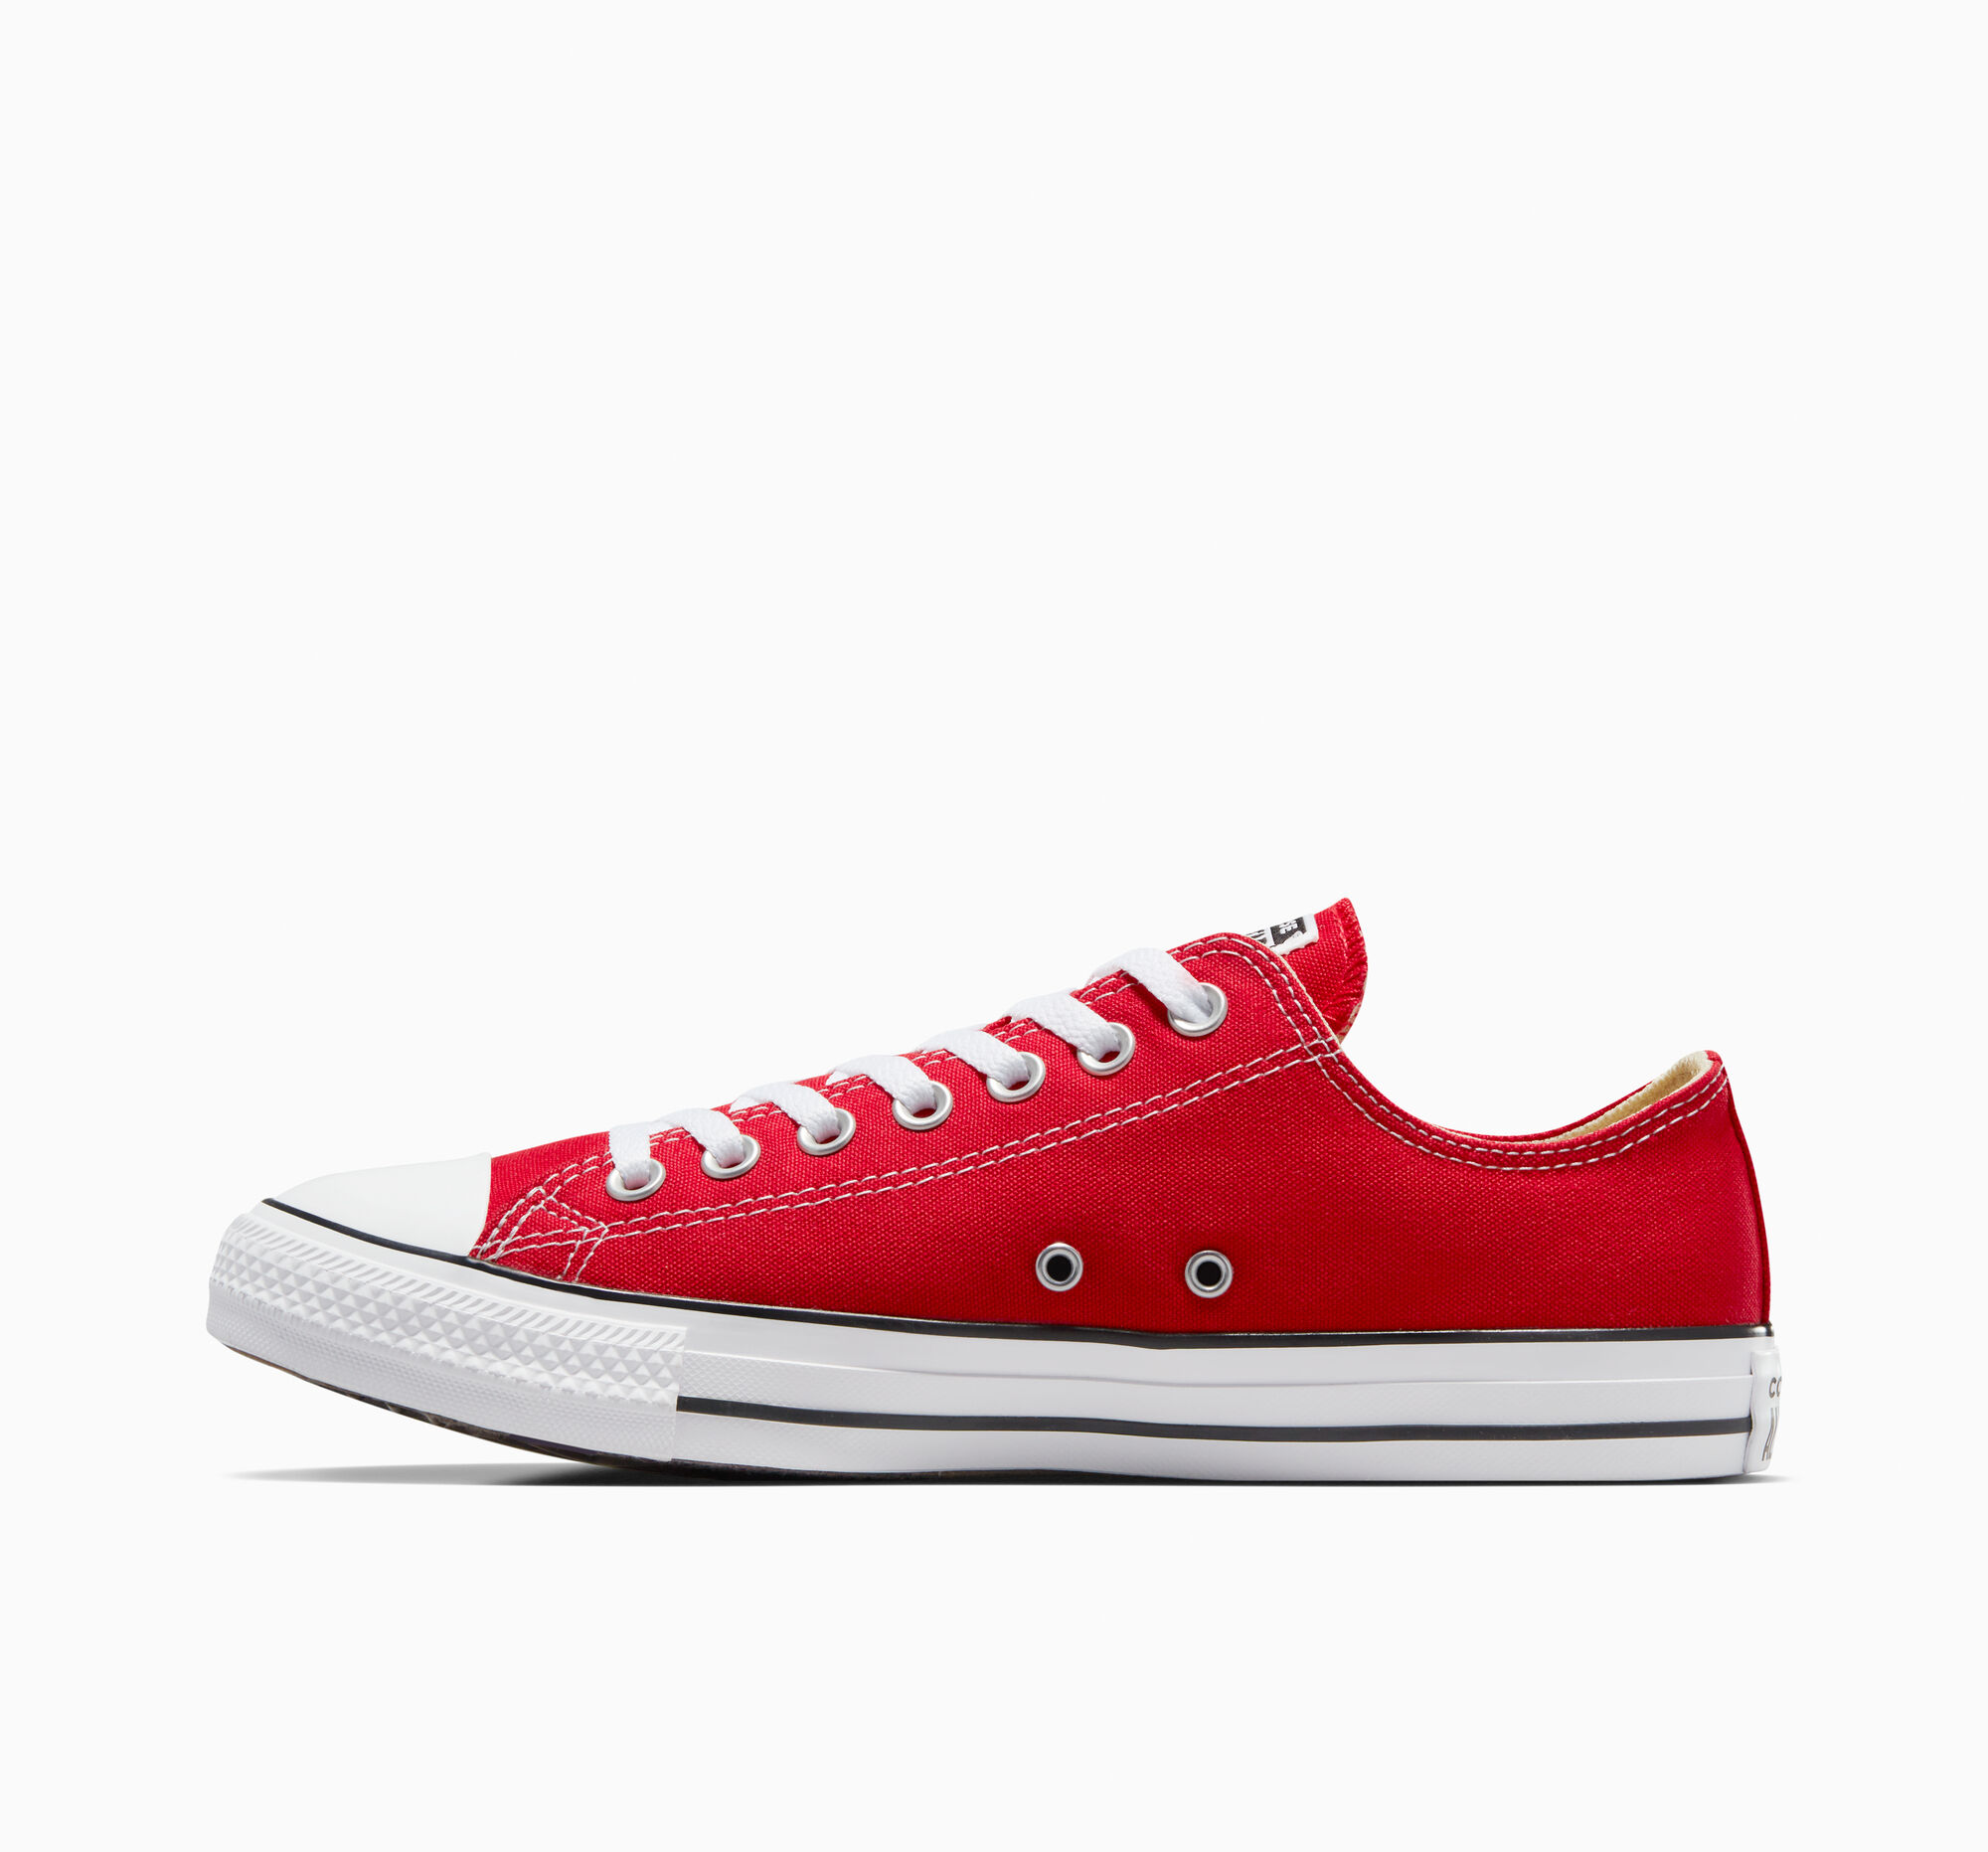 converse-chuck-taylor-all-star-ox-shoes-m9696